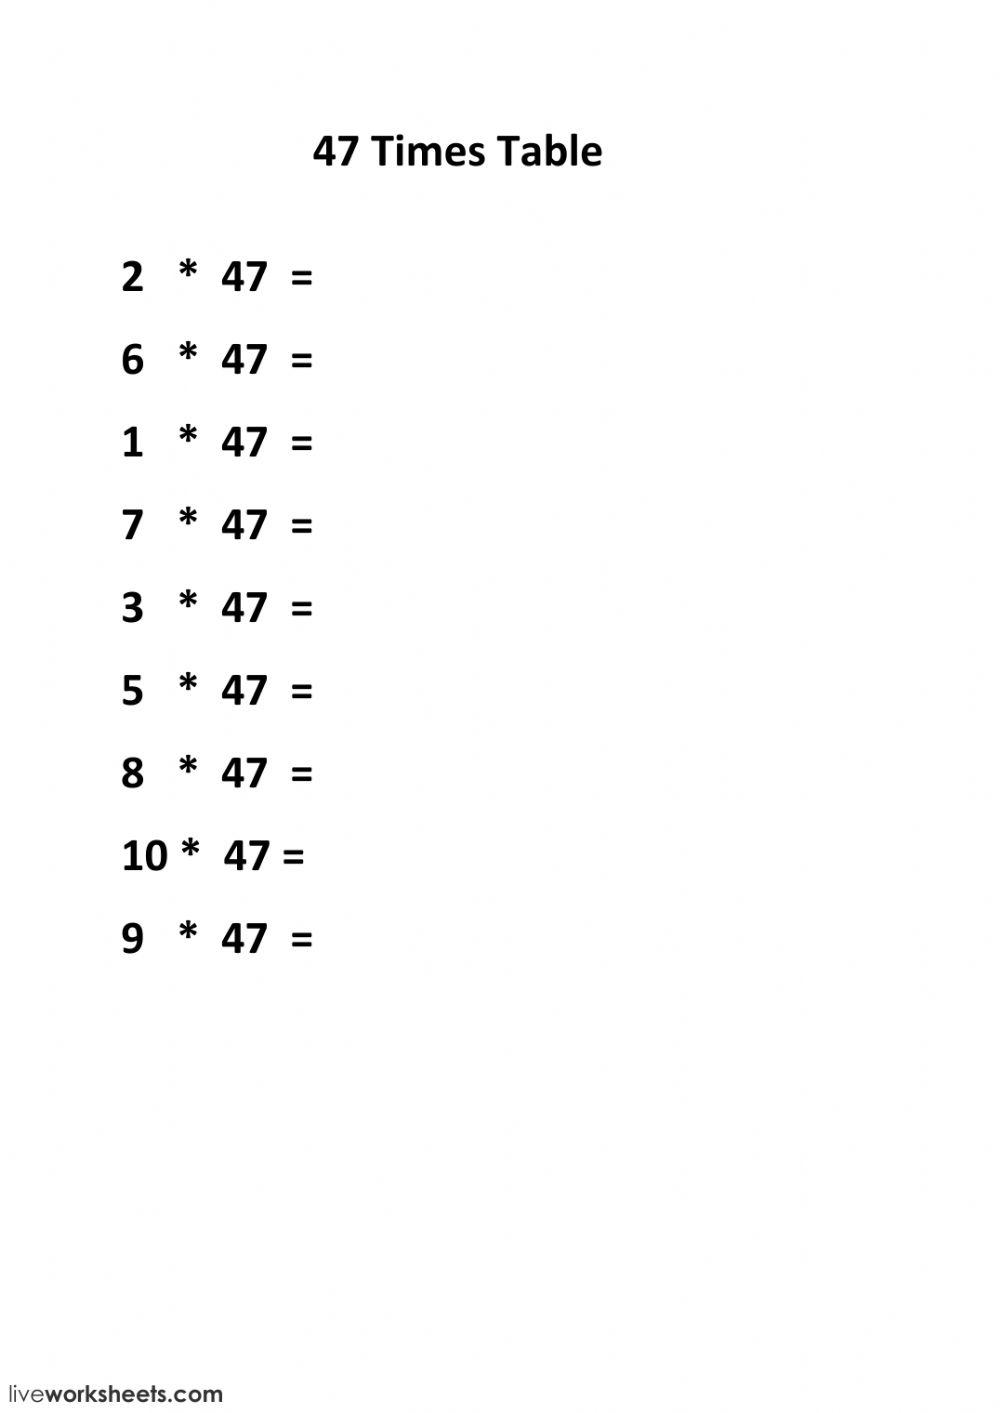 47 Times table